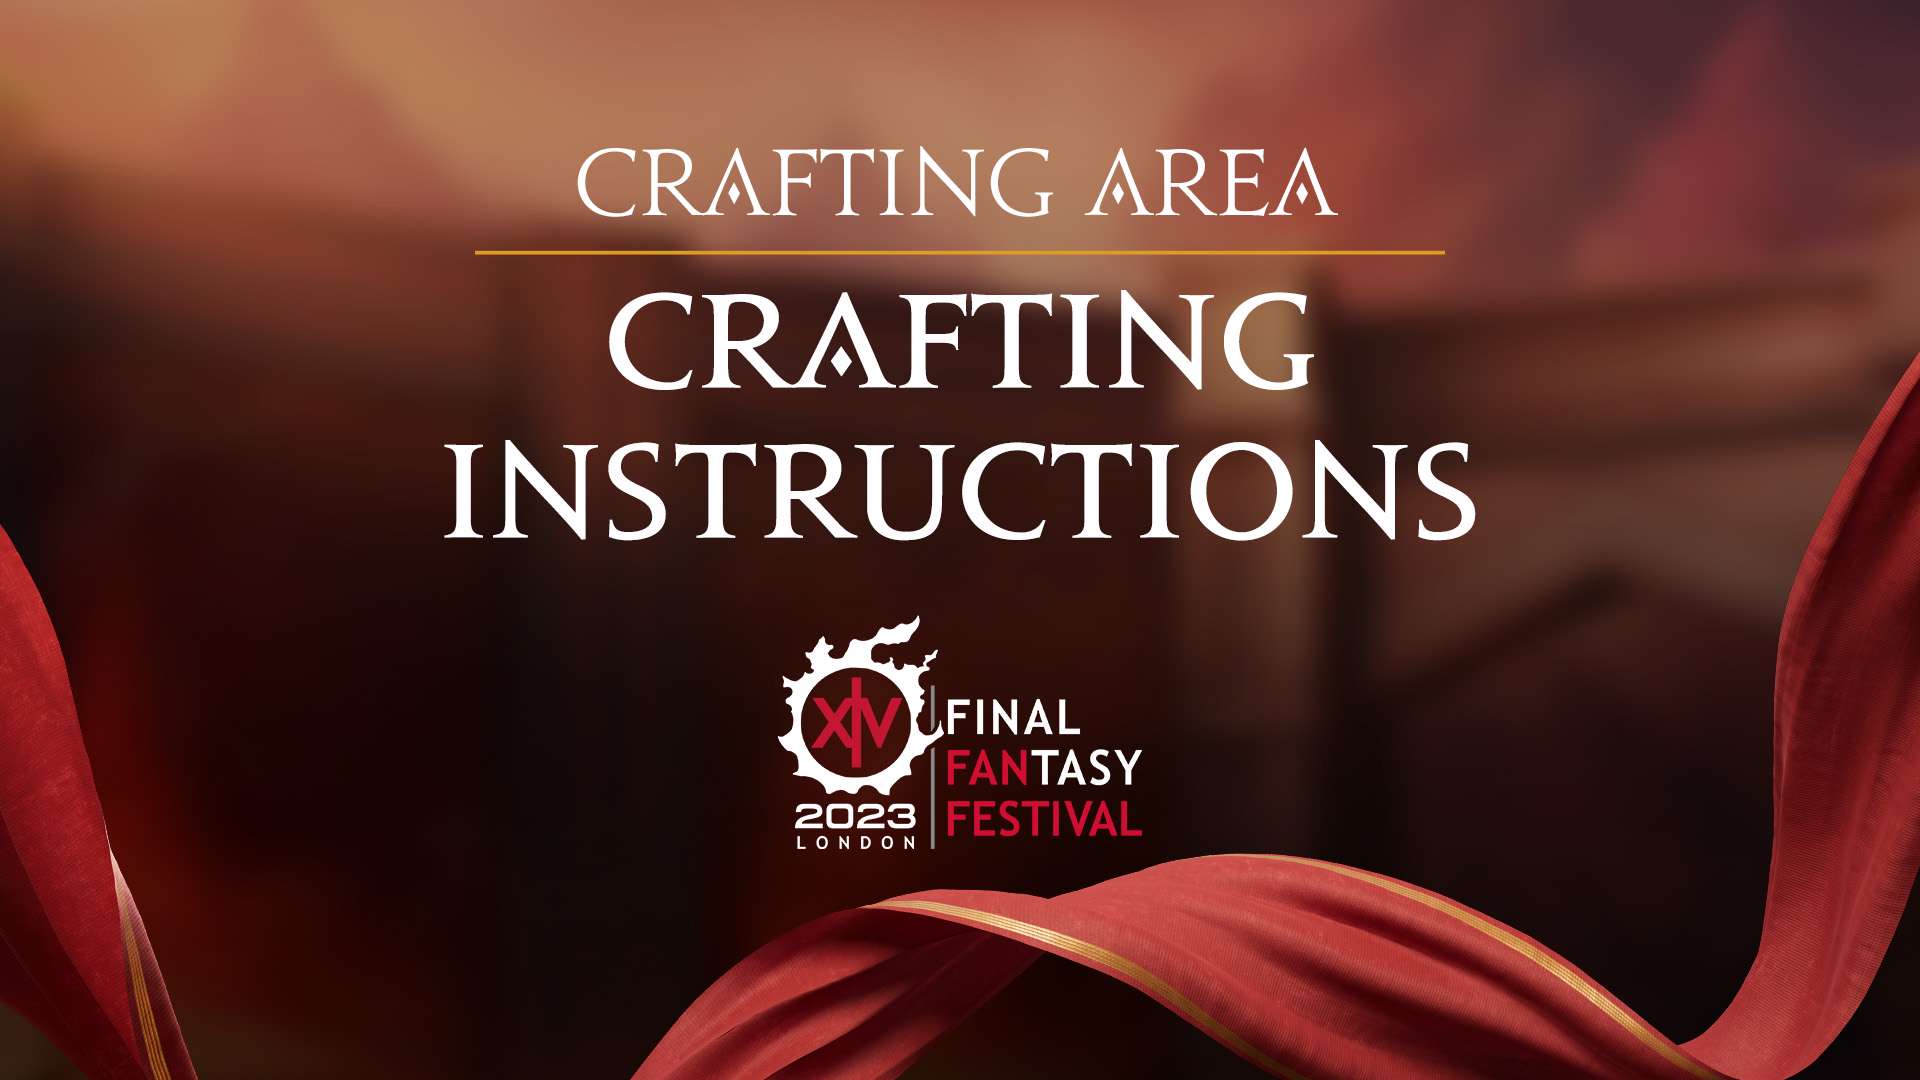 Crafting Area Crafting Instructions. Fan Festival 2023 in London.